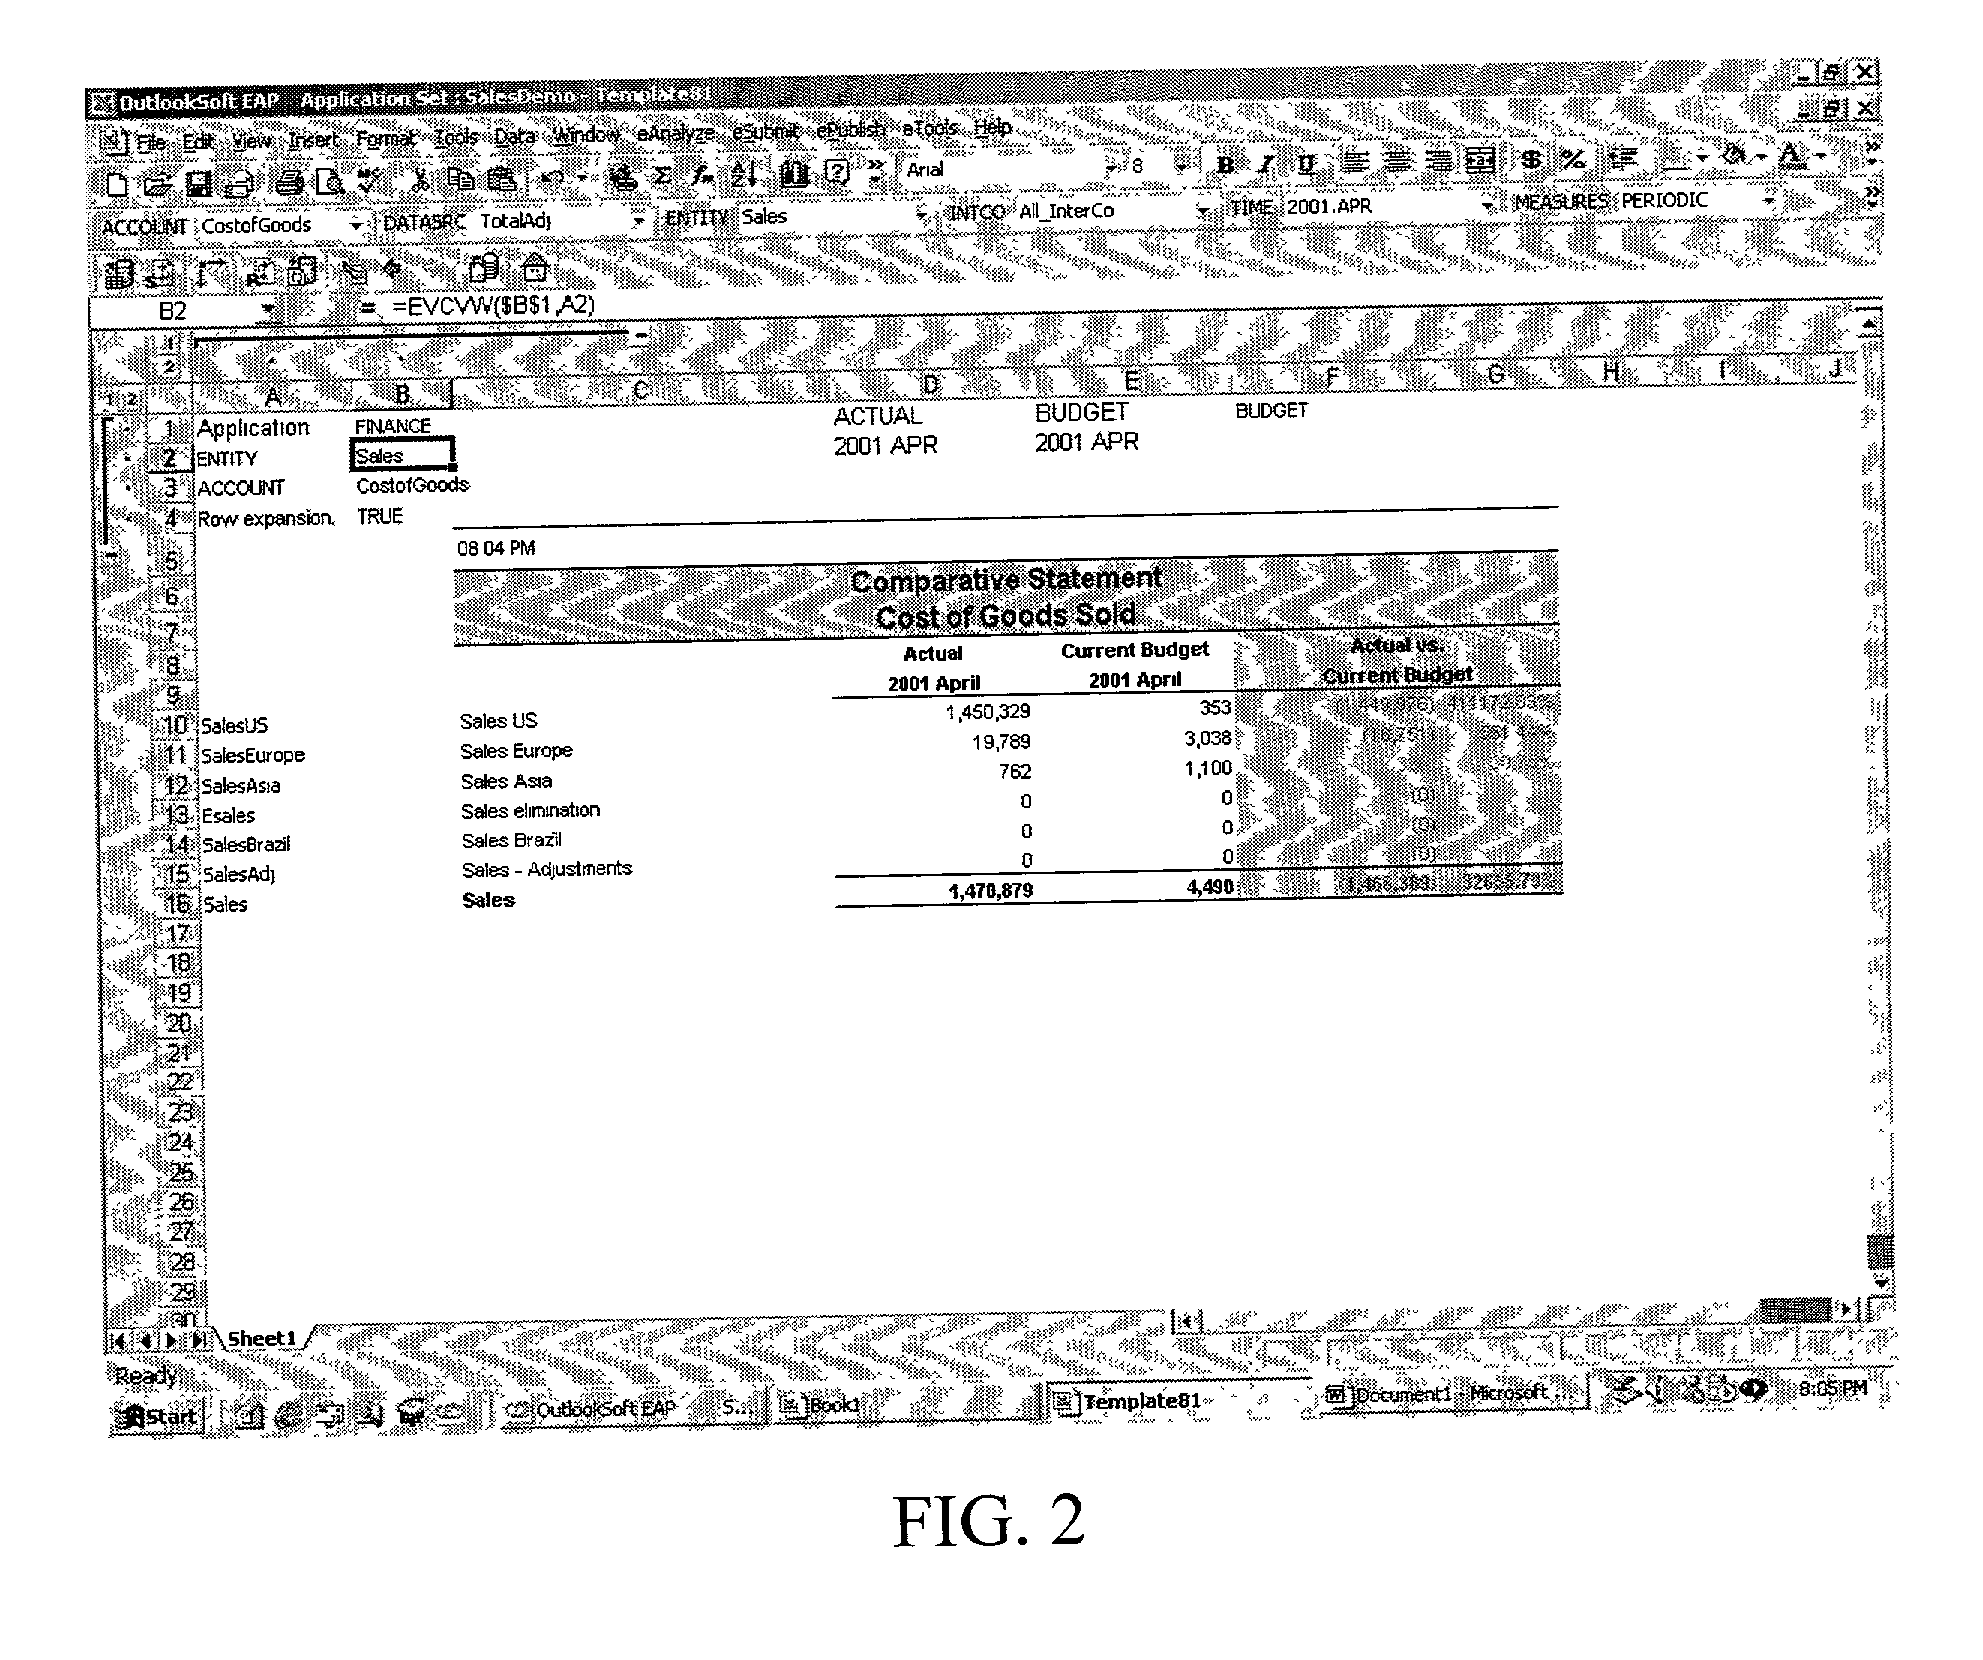 Systems and methods providing dynamic spreadsheet functionality